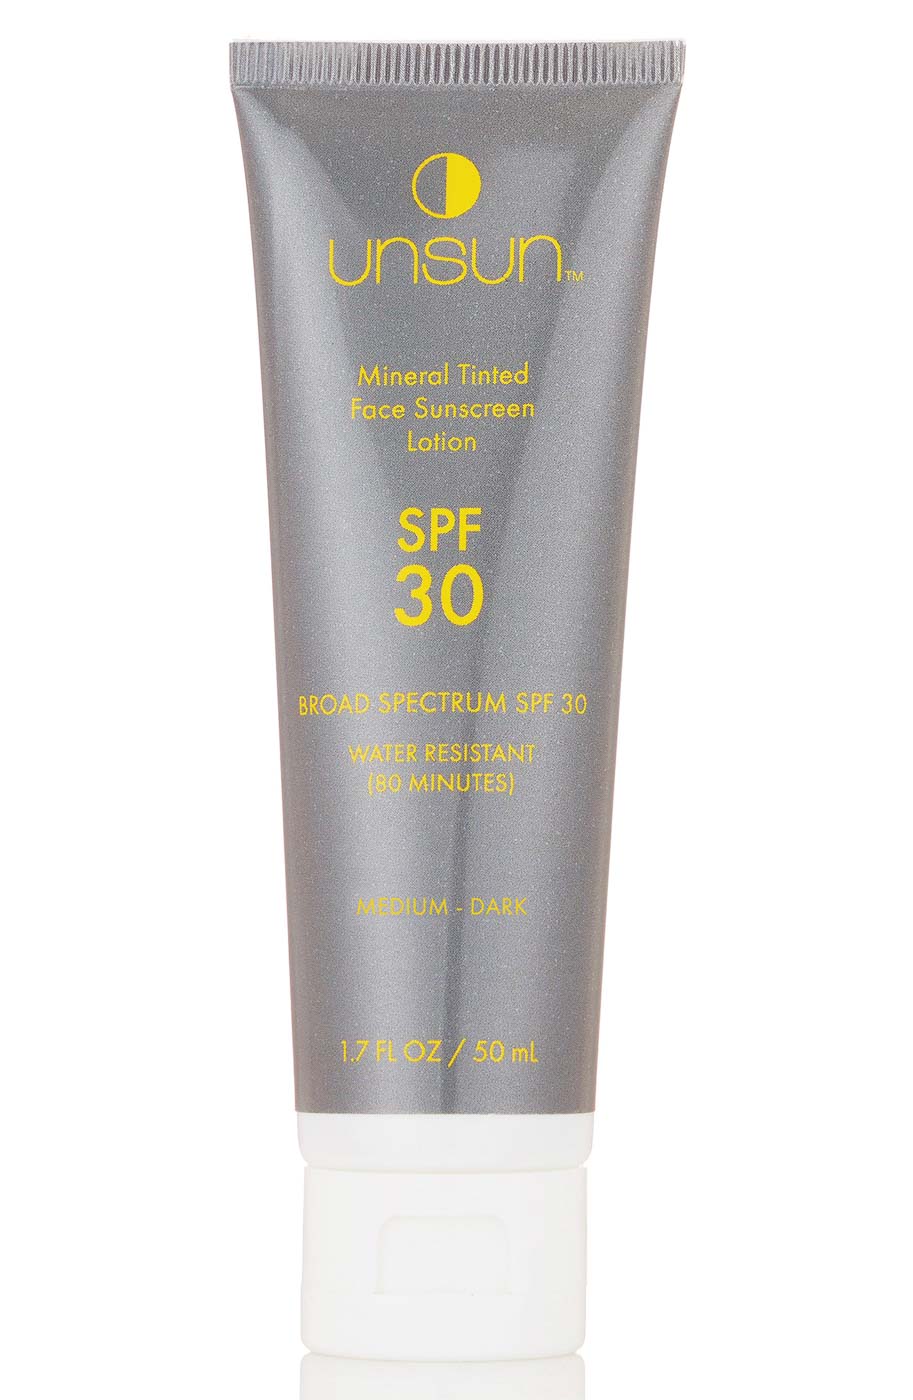 30 Unsun, Mineral Tinted Face Sunscreen Lotion, Nordstrom